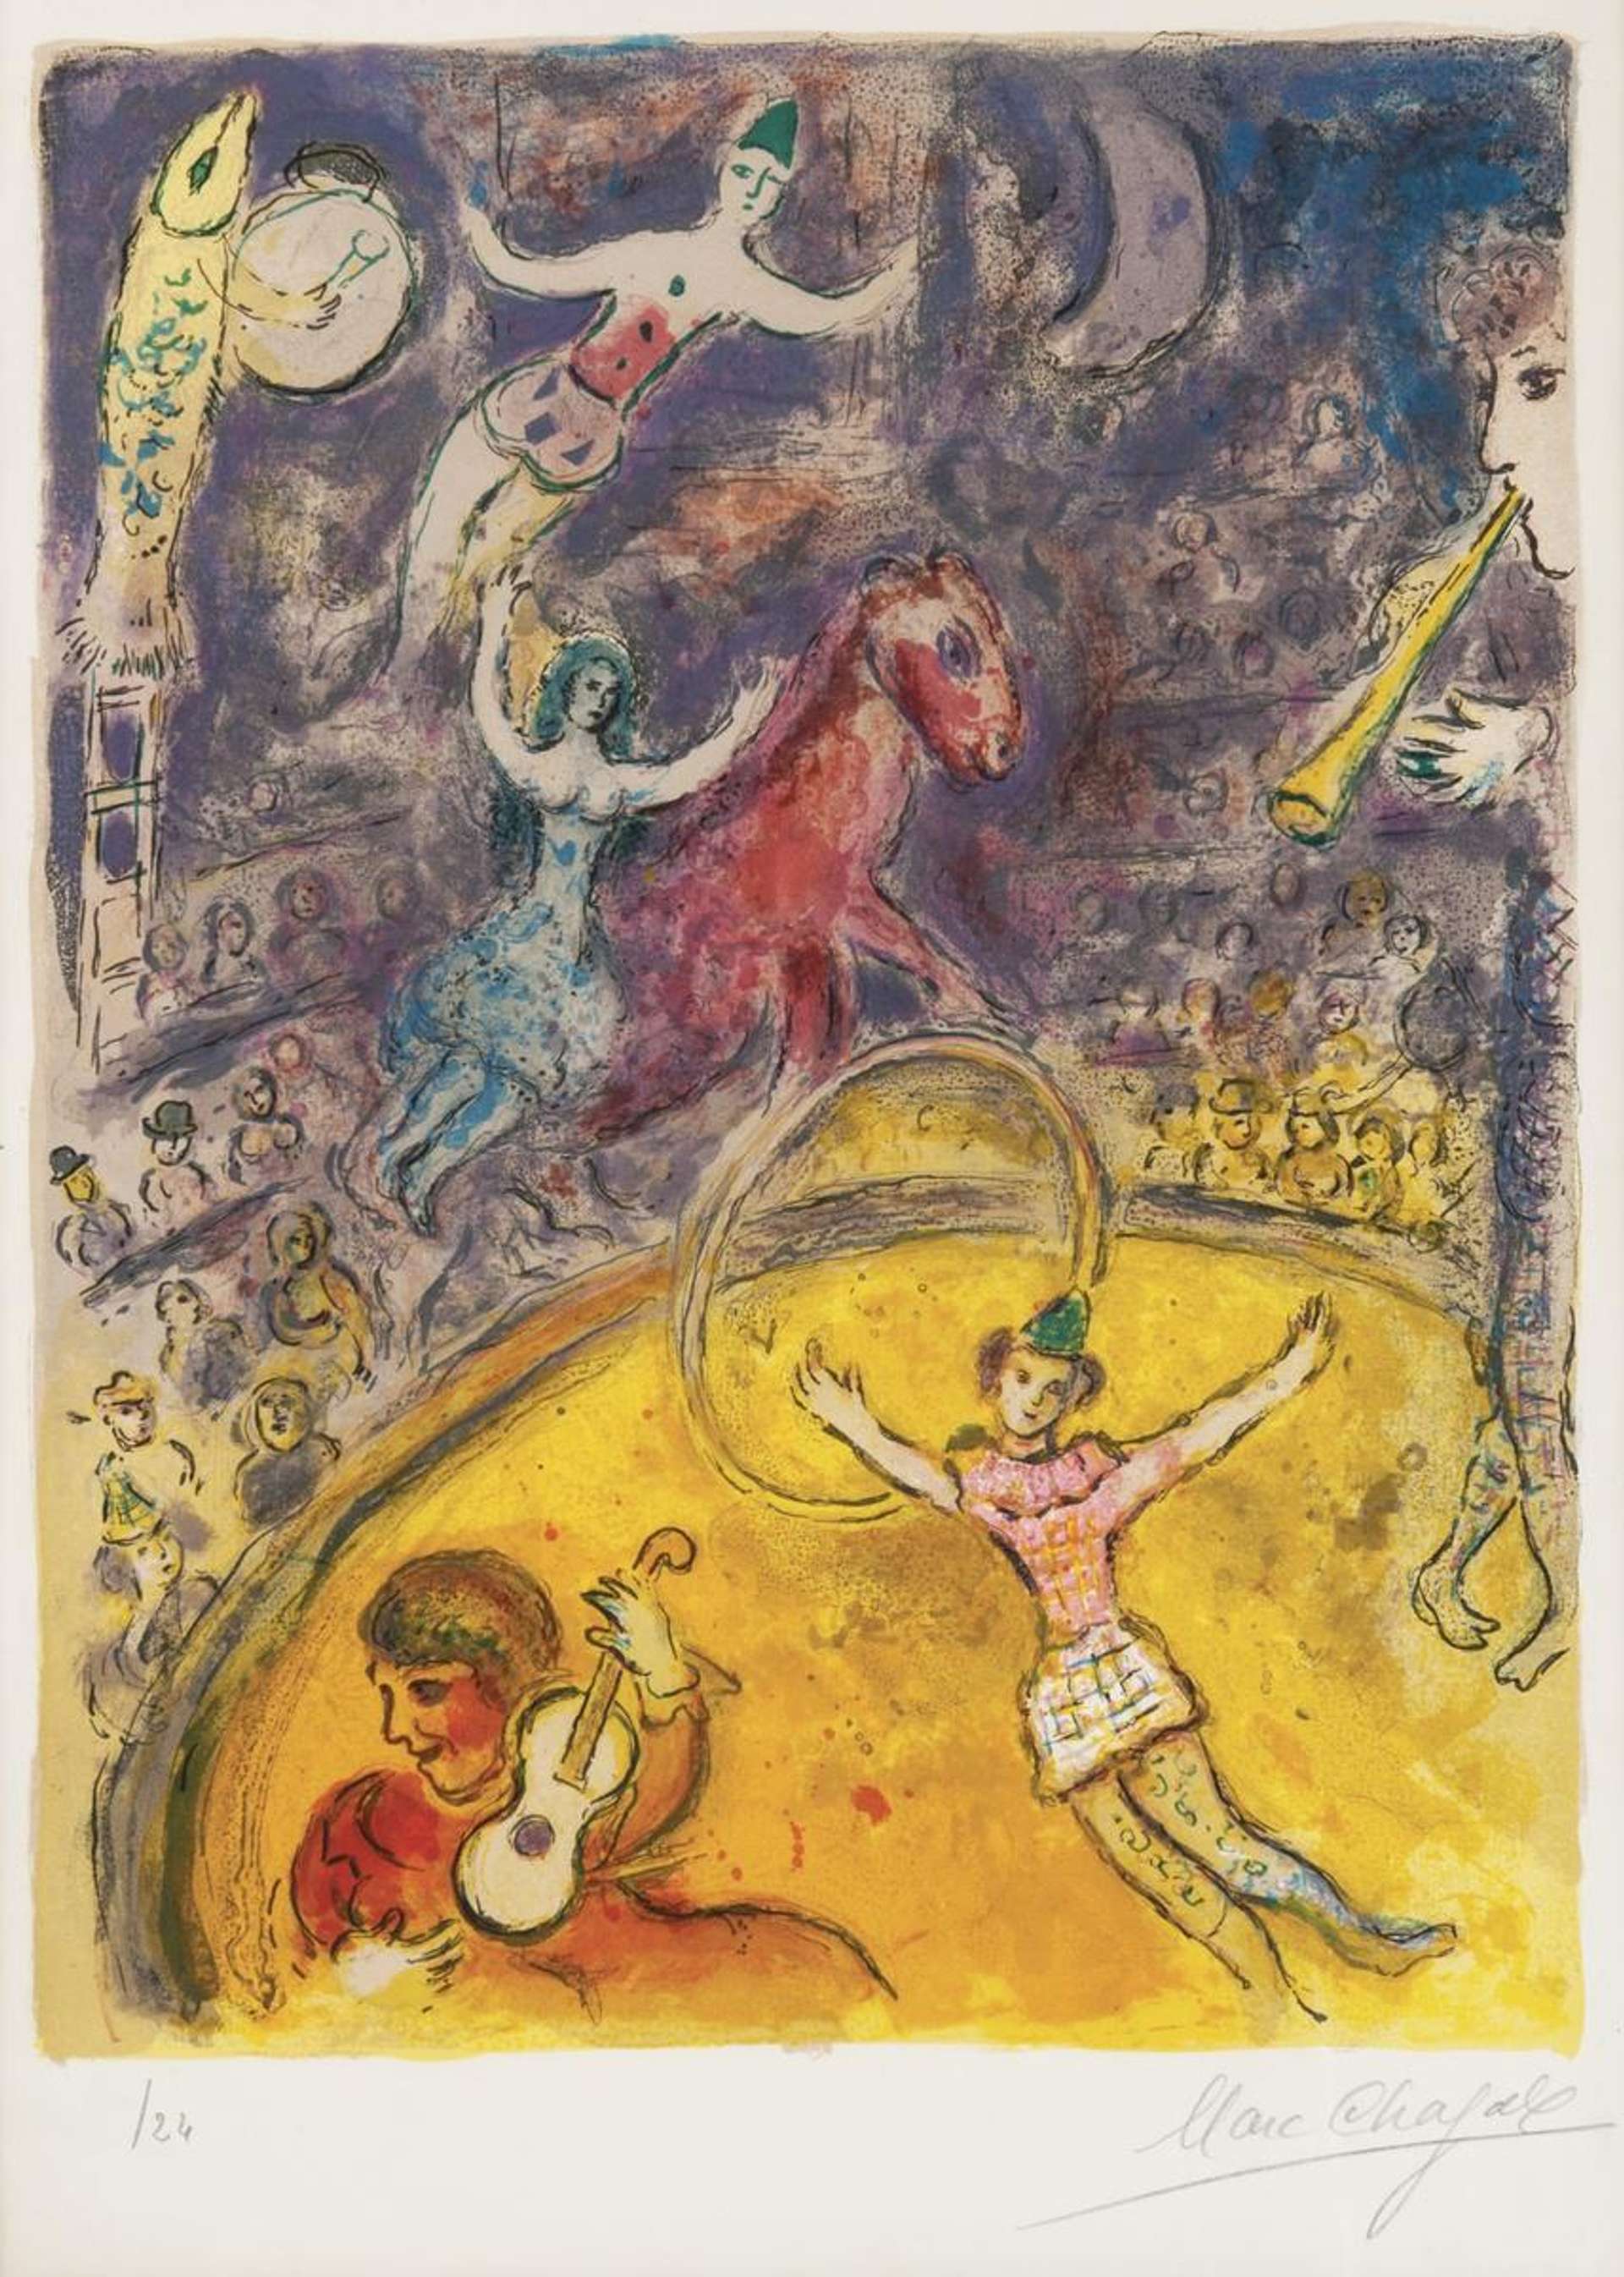 Marc Chagall: Plate 23 (Le Cirque) - Signed Print